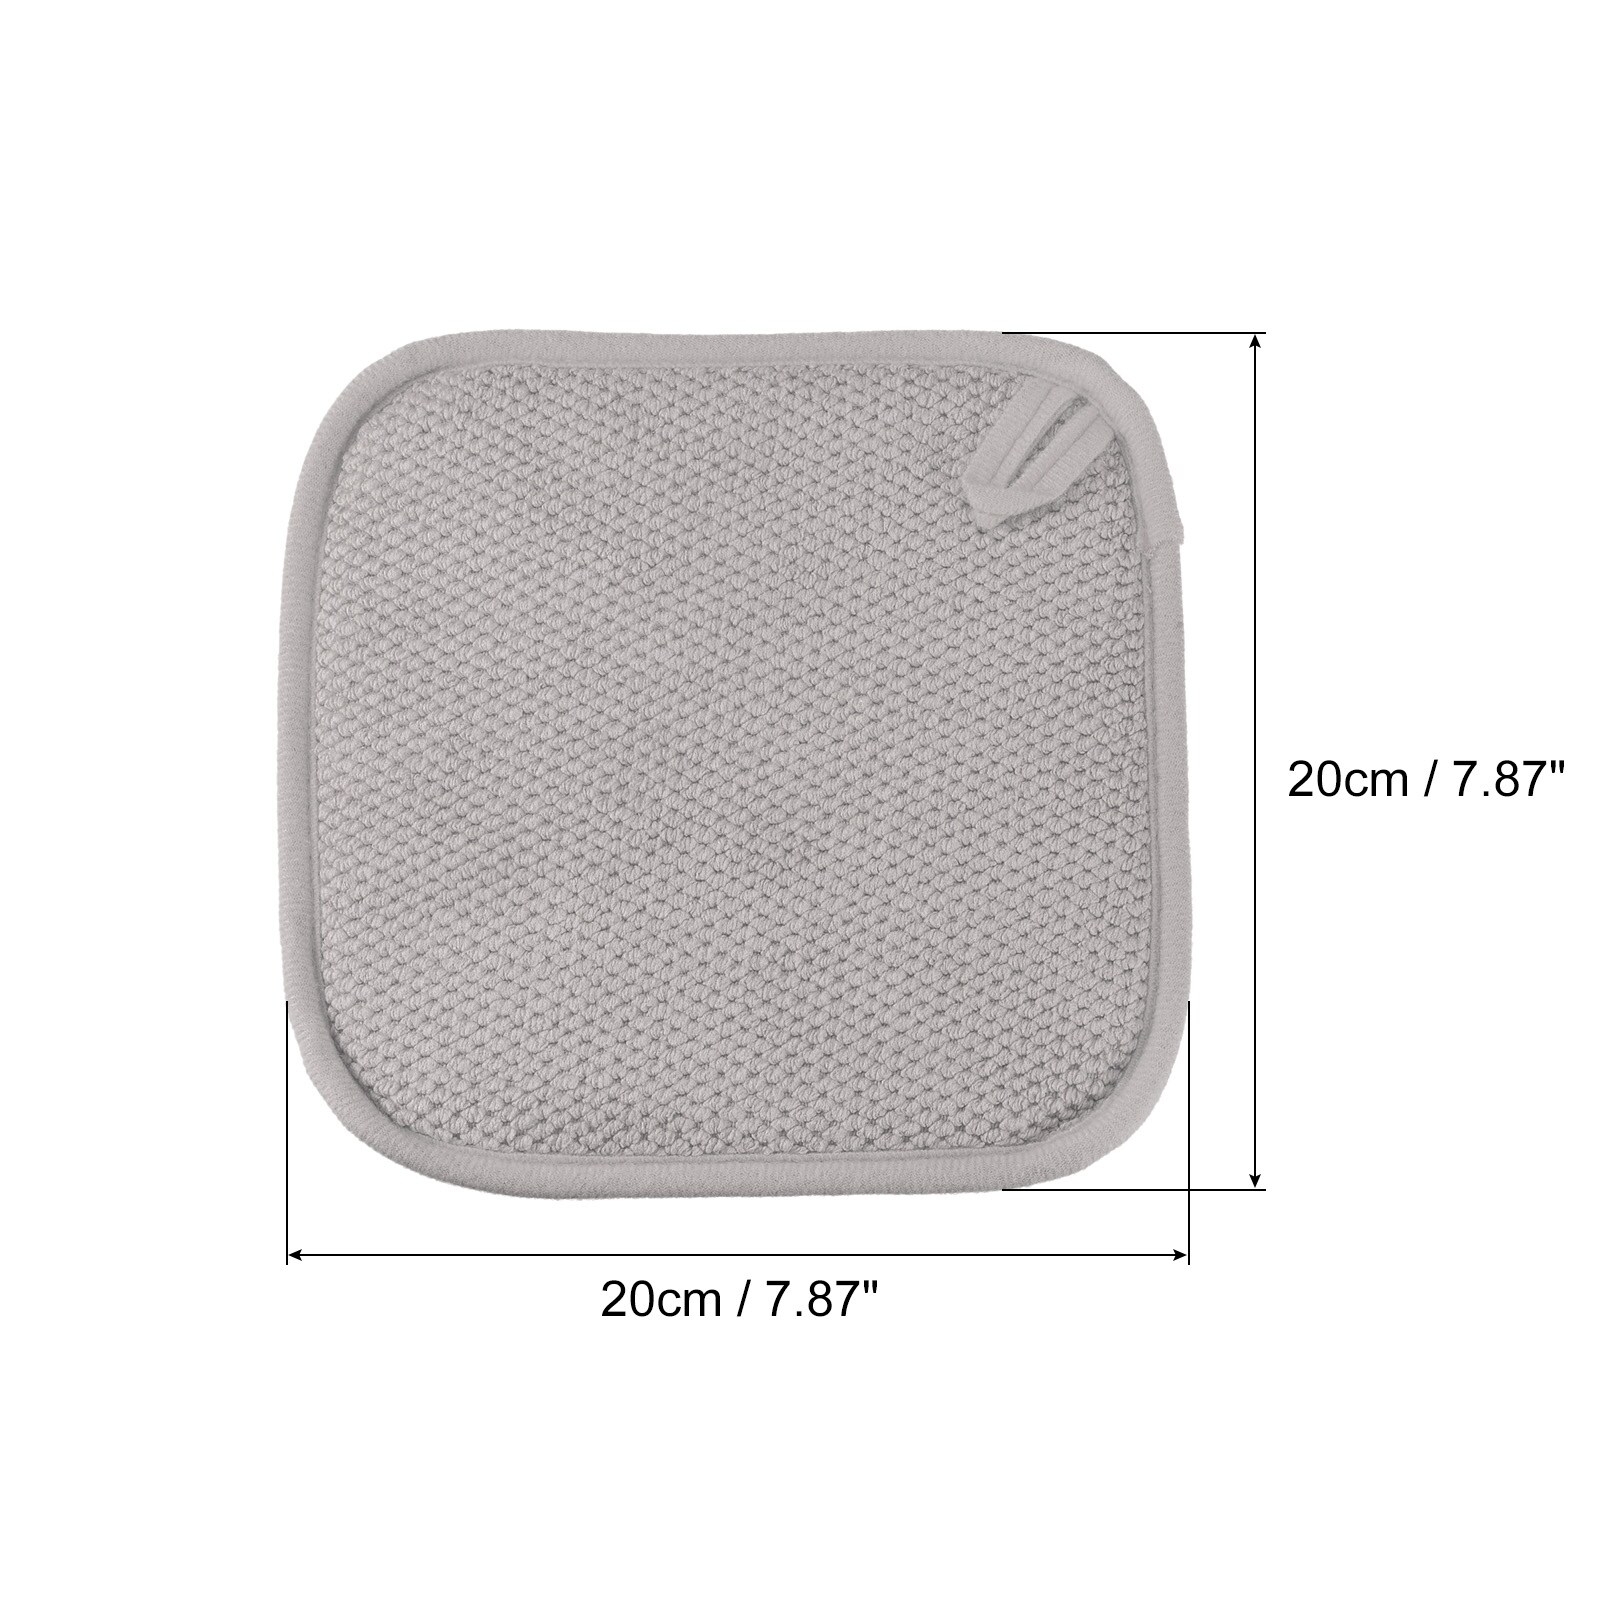 https://ak1.ostkcdn.com/images/products/is/images/direct/2376af79aa9739c8a72d4ffa8dac2c9a032ad435/2pcs-Dish-Drying-Mat-Microfiber-Dishes-Drainer-Mats-Dish-Drying-Pad-Red.jpg